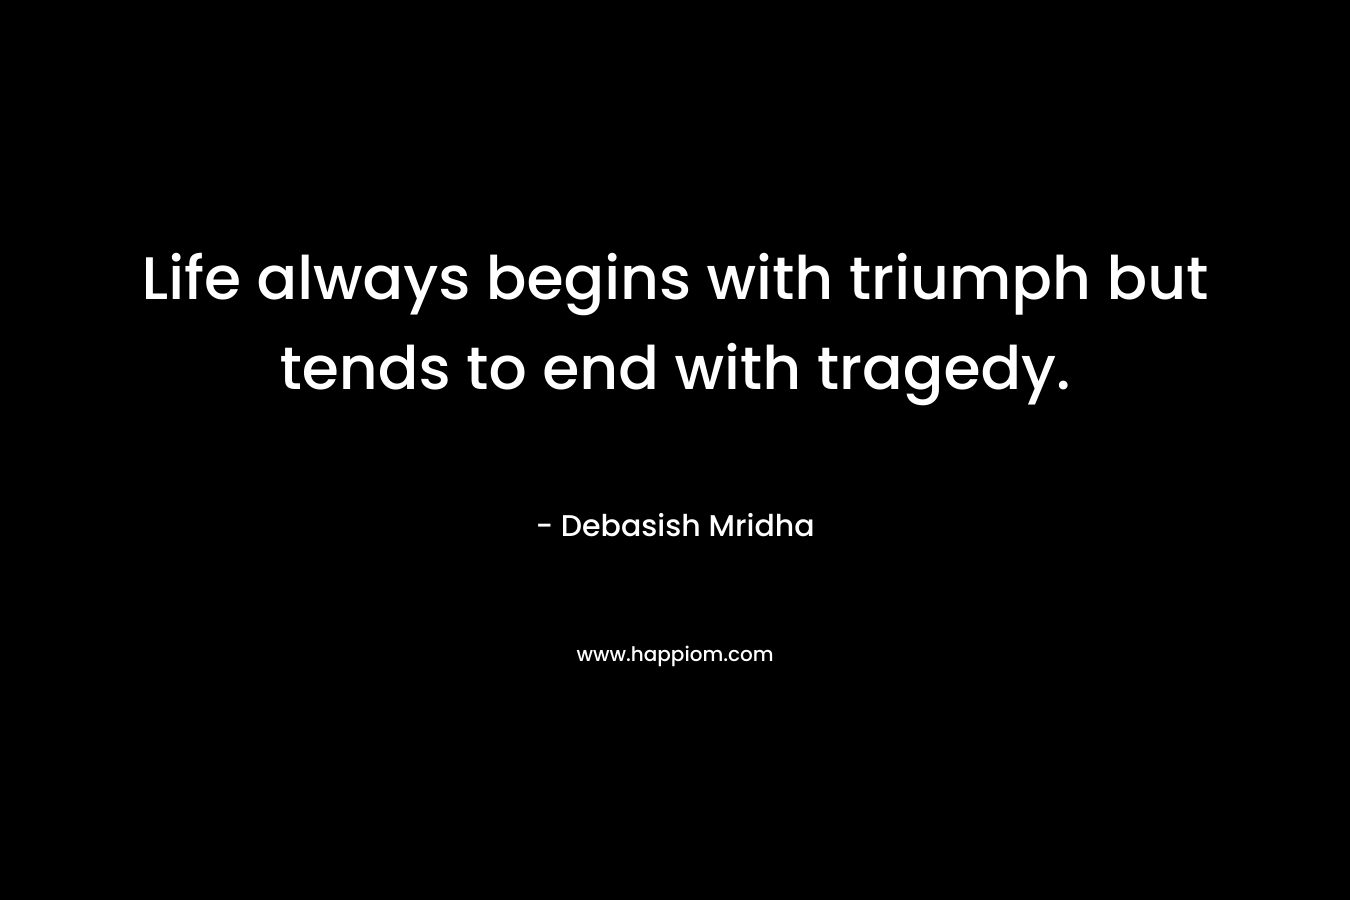 Life always begins with triumph but tends to end with tragedy.